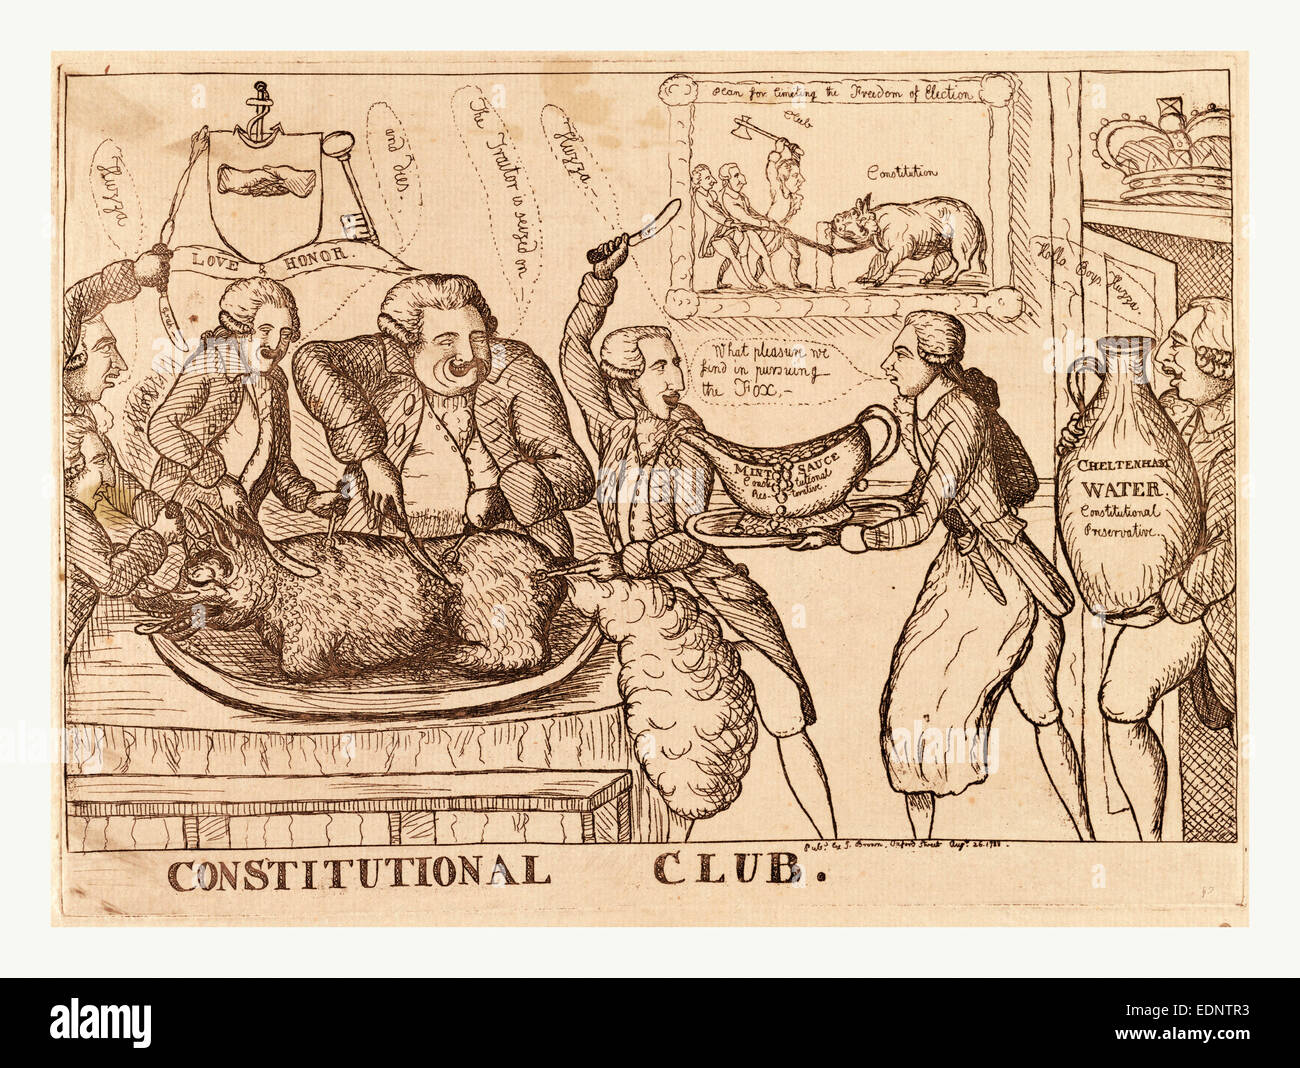 Constitutional Club, Dent, William, active 1741-1780, artist, England, satire on the Westminster by-election of 1788 Stock Photo